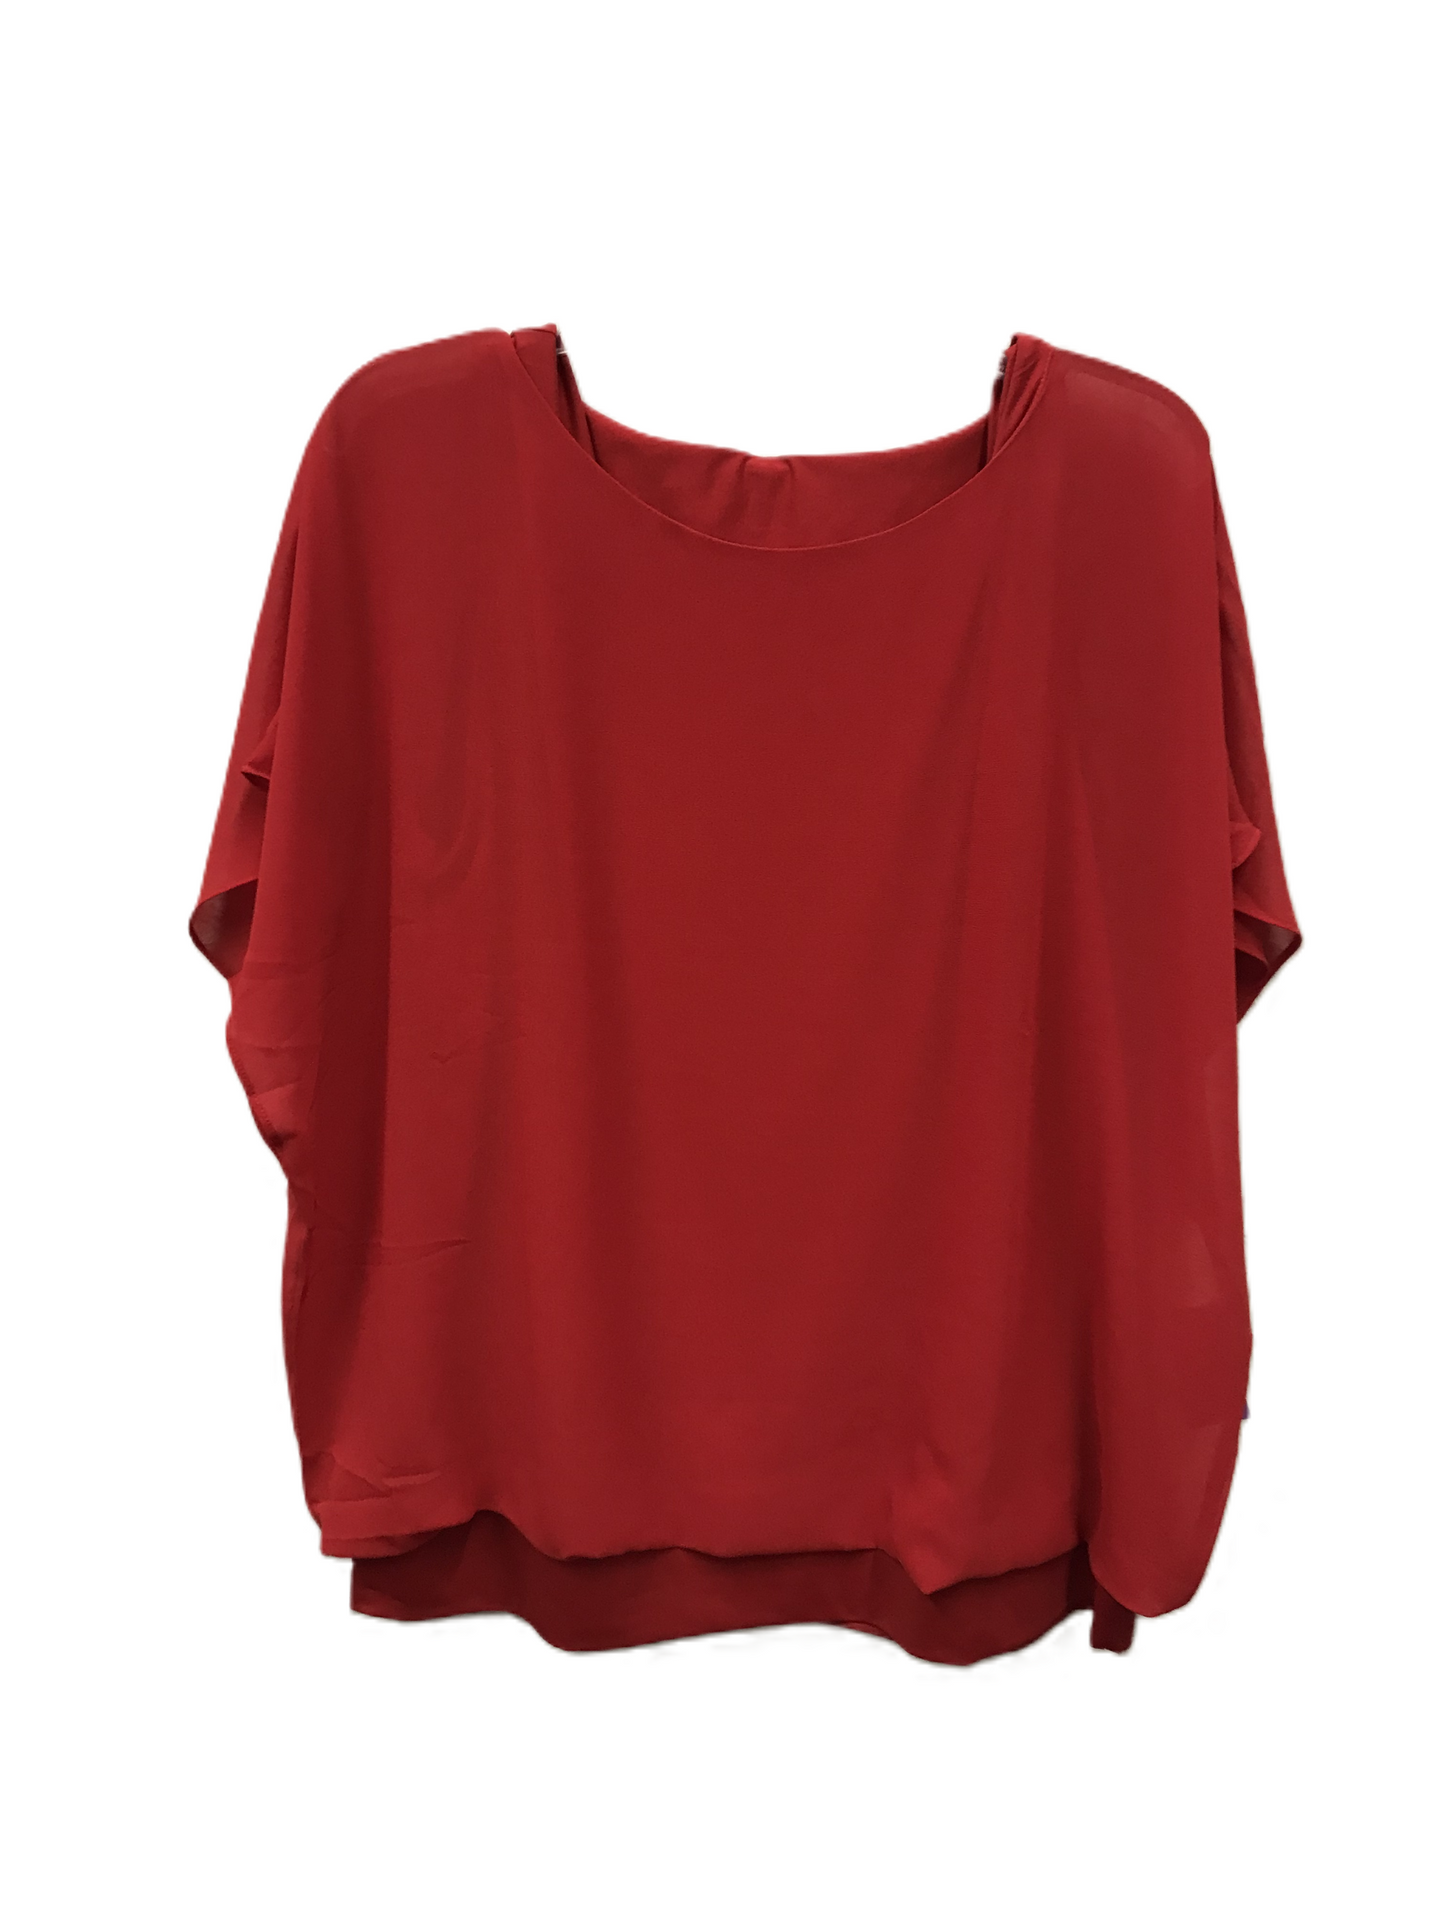 Red Top Short Sleeve By Vishow, Size: 2x